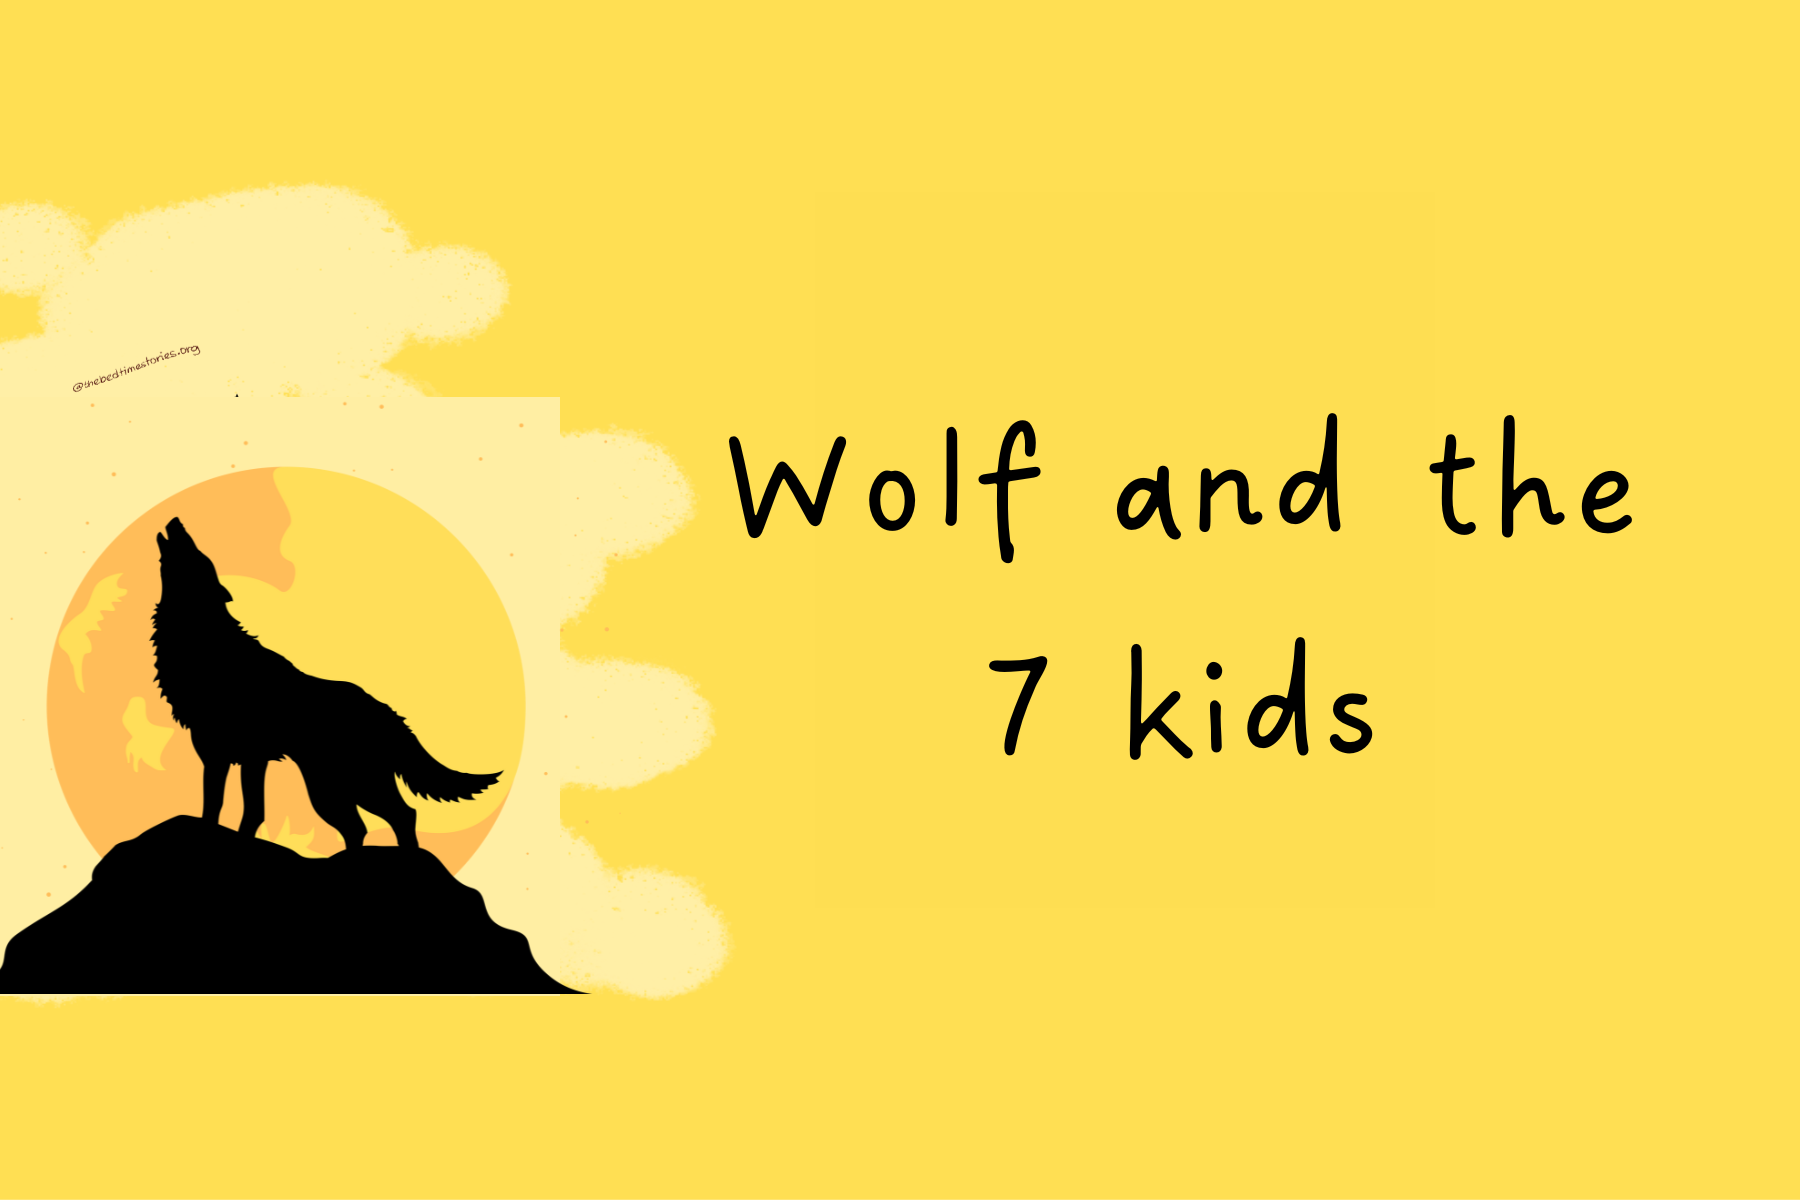 The Wolf And 7 Kids: Top 5 Best Animal Stories